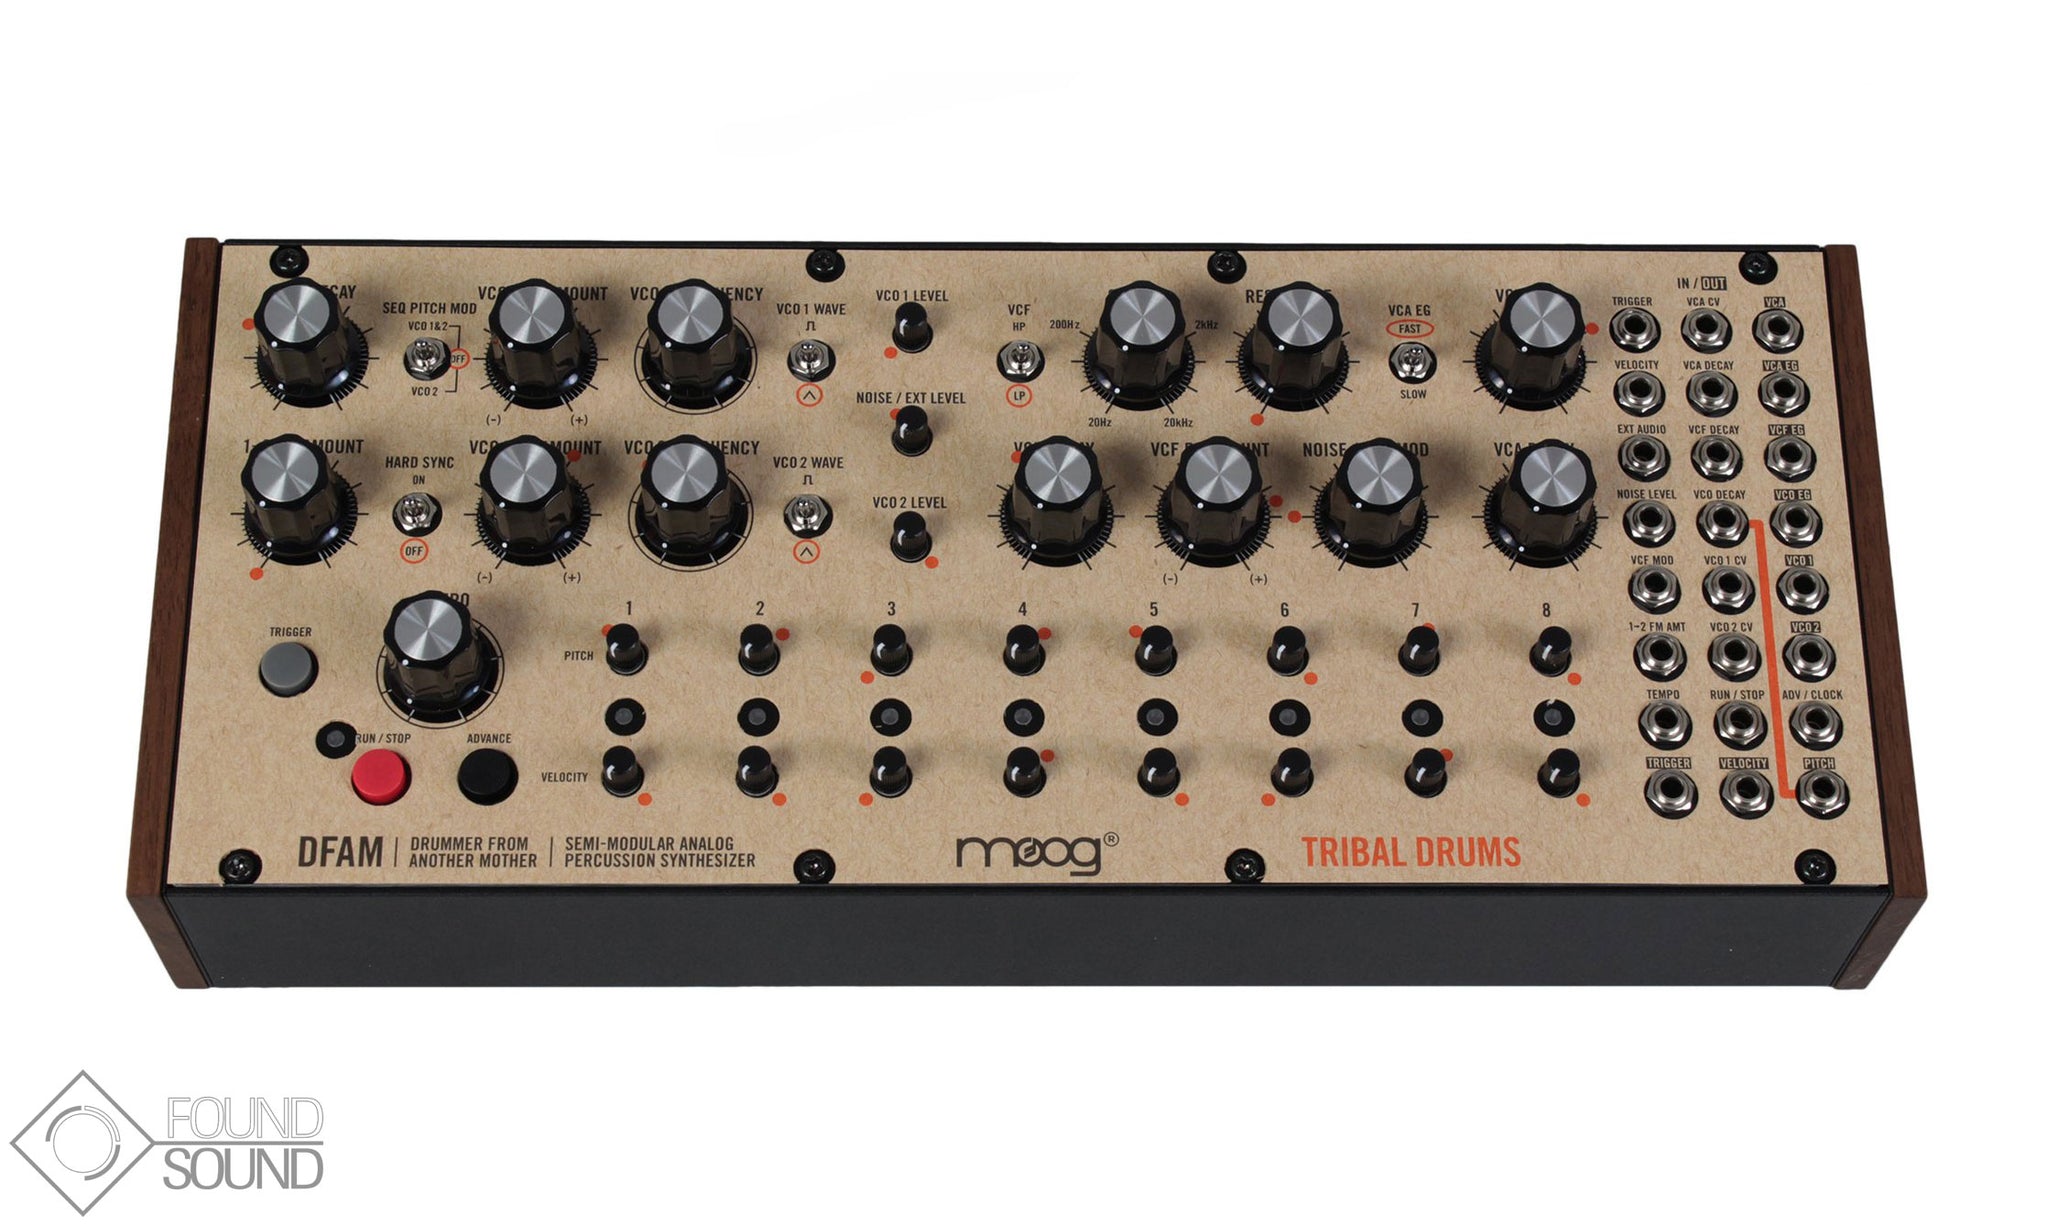 Moog DFAM Drummer From Another Mother – Found Sound